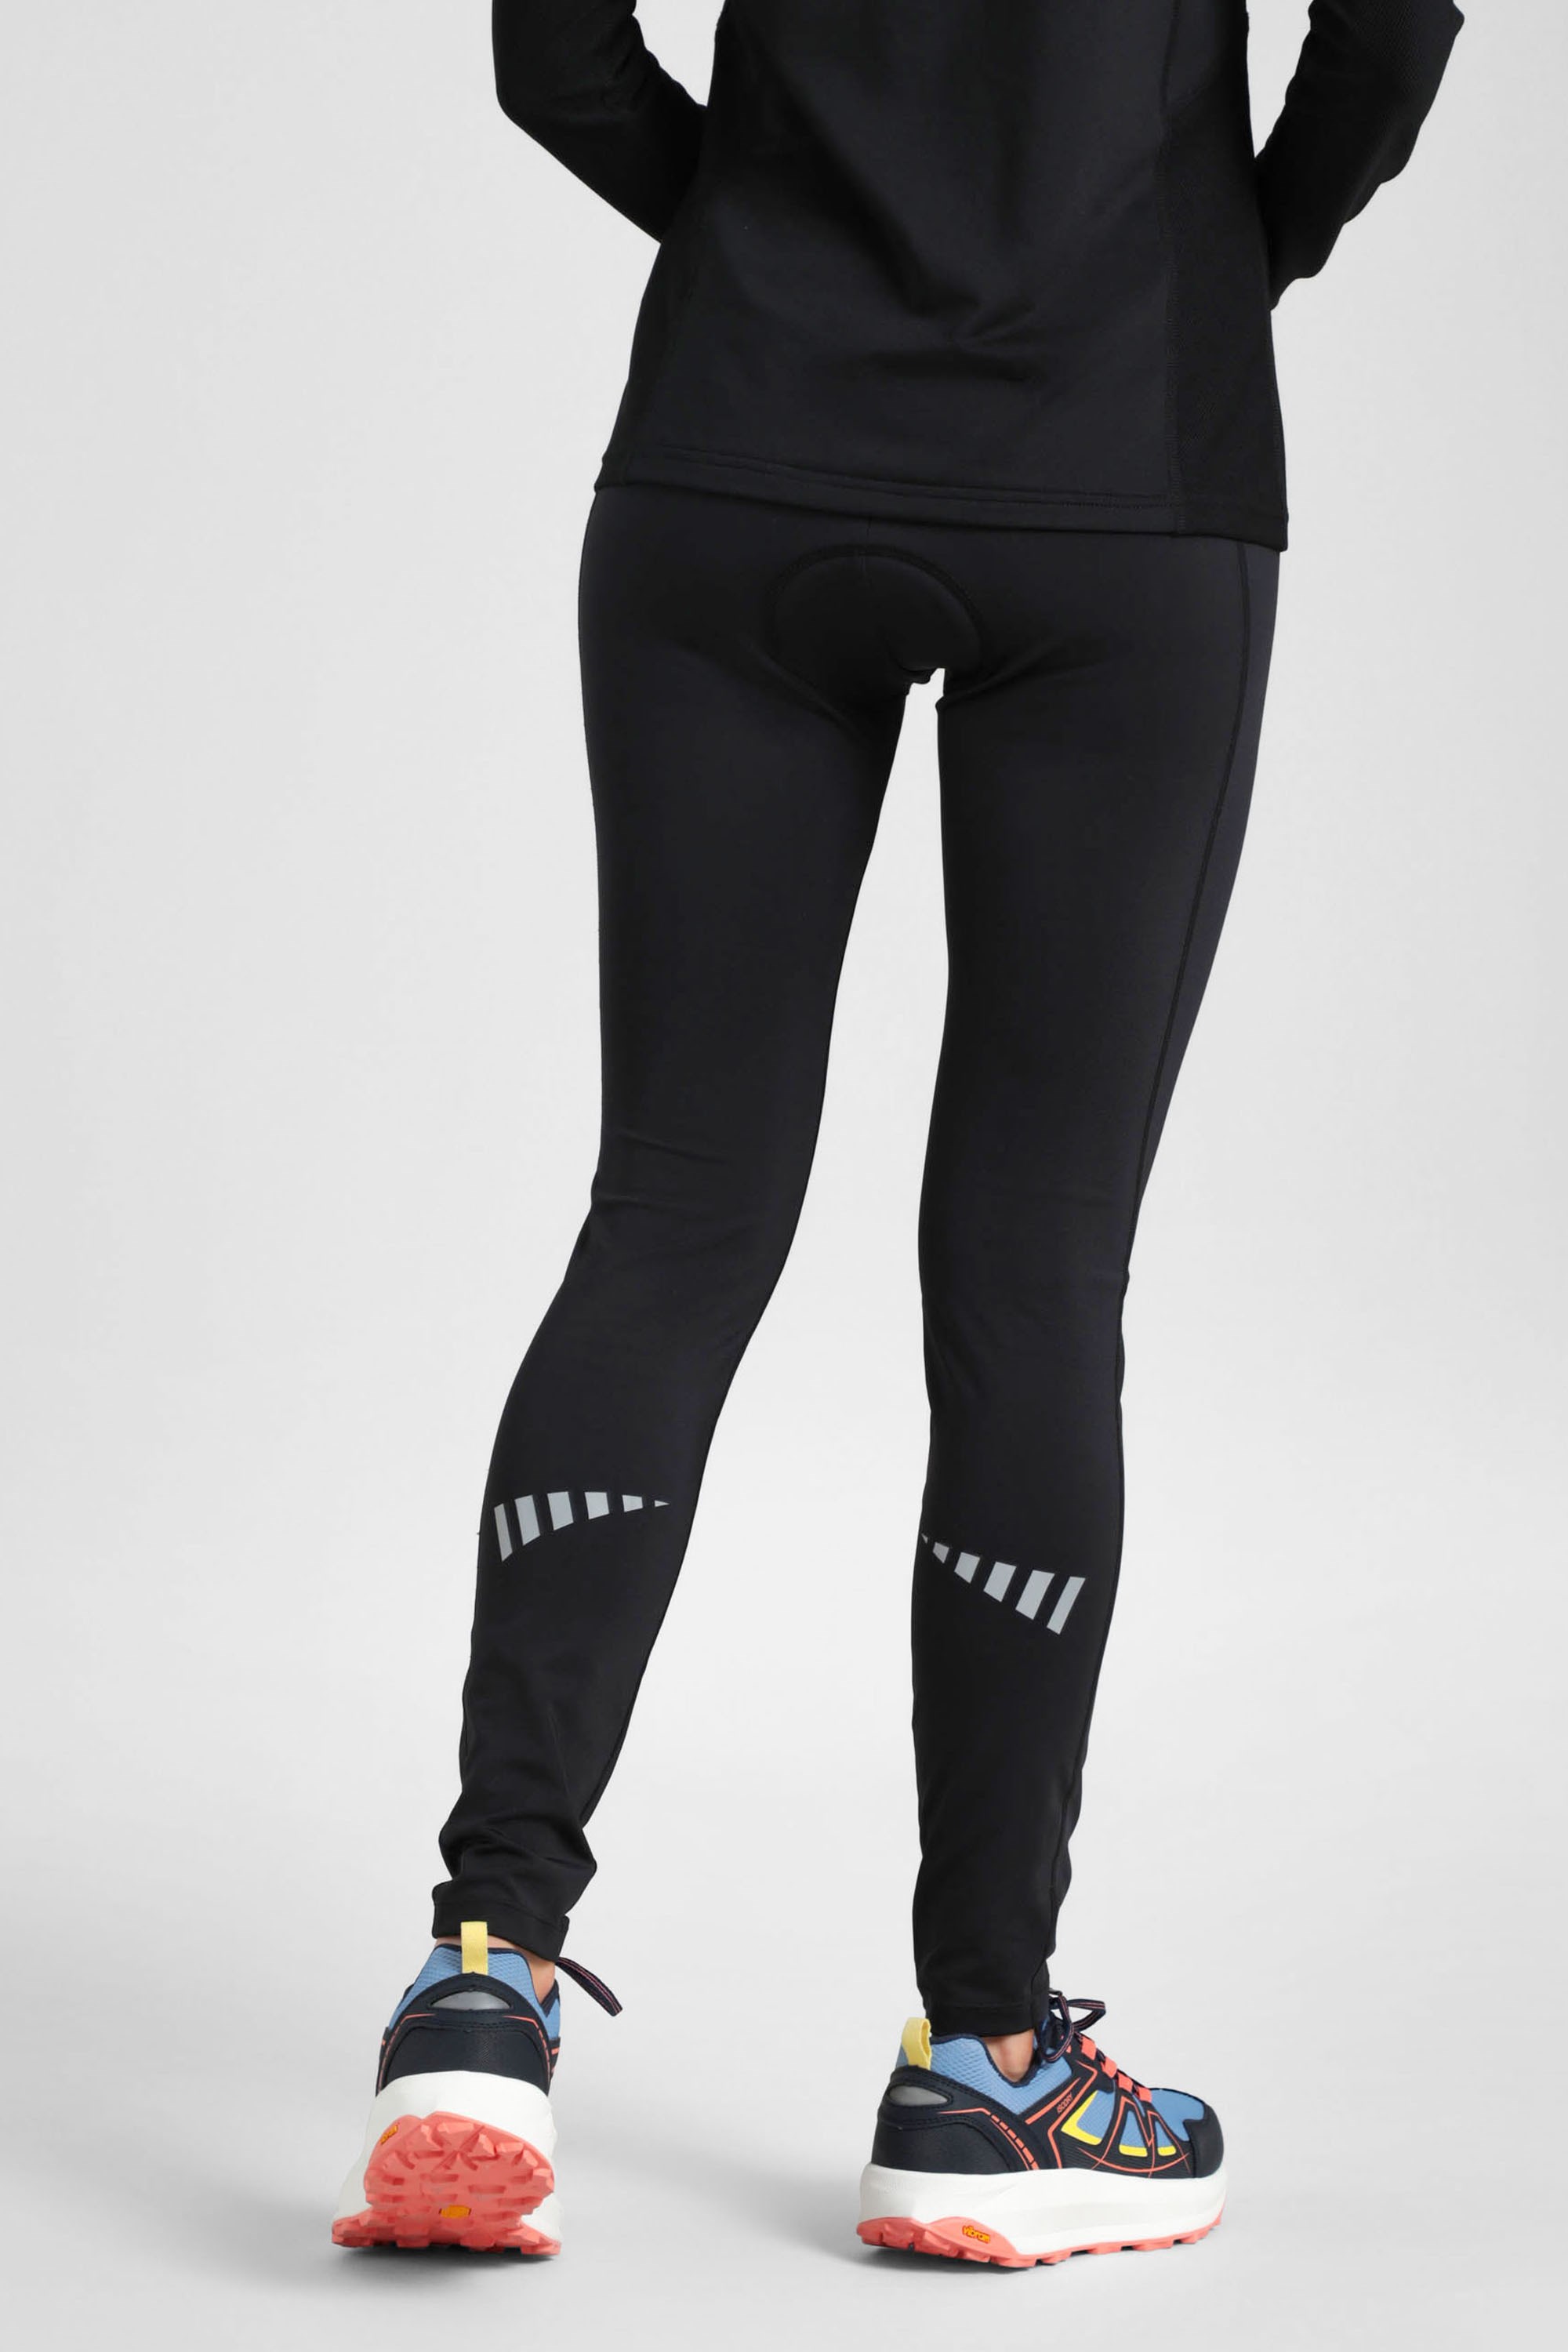 Speed Up Womens Padded Cycling Leggings